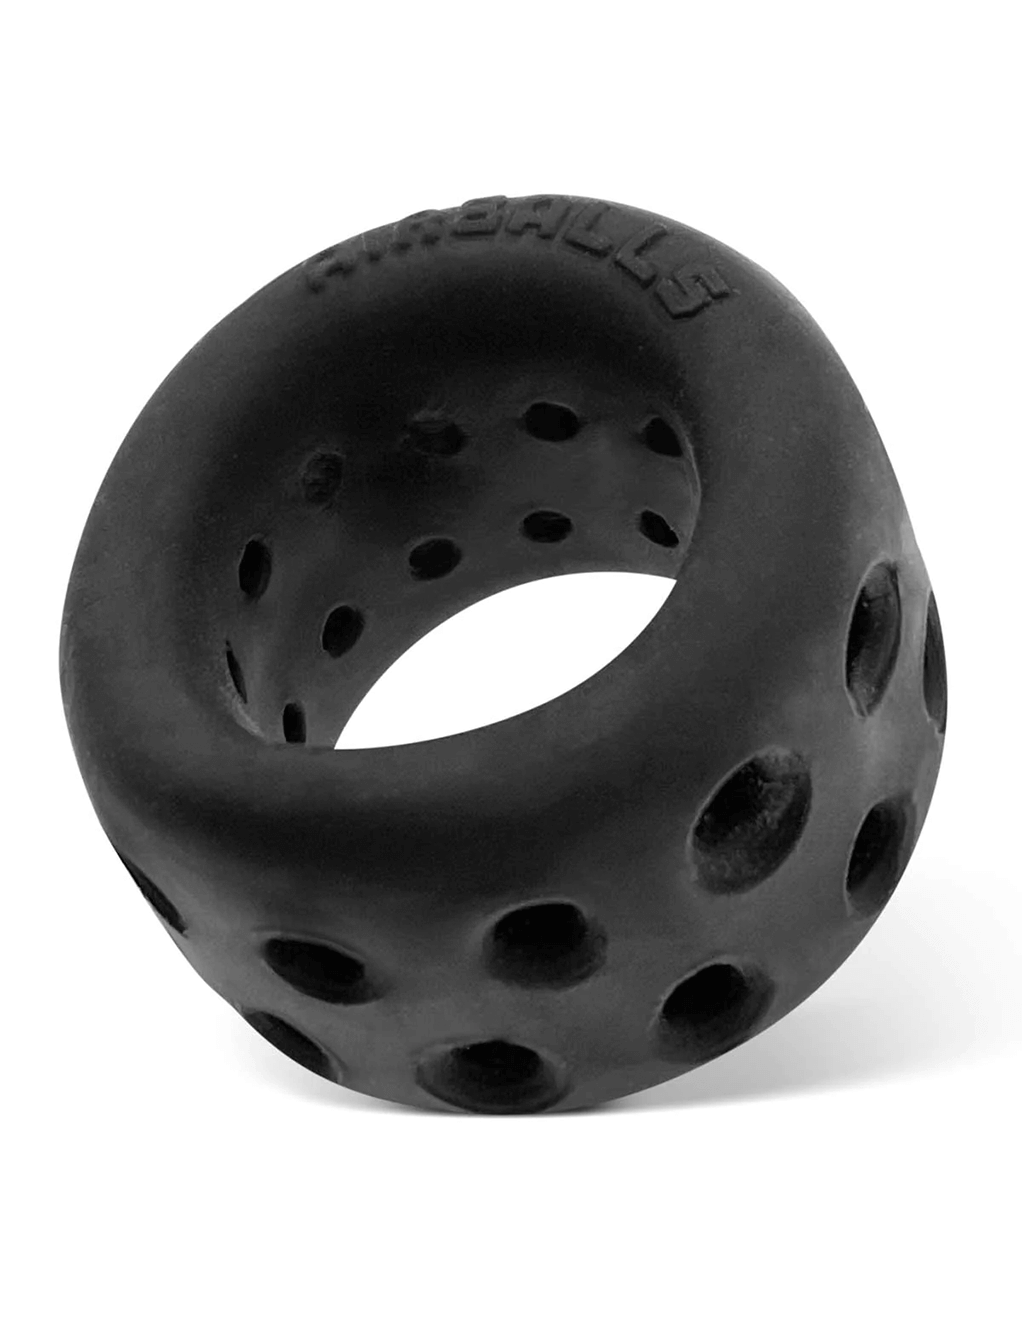 Airballs Ballstretcher - Black Ice - Front Angle